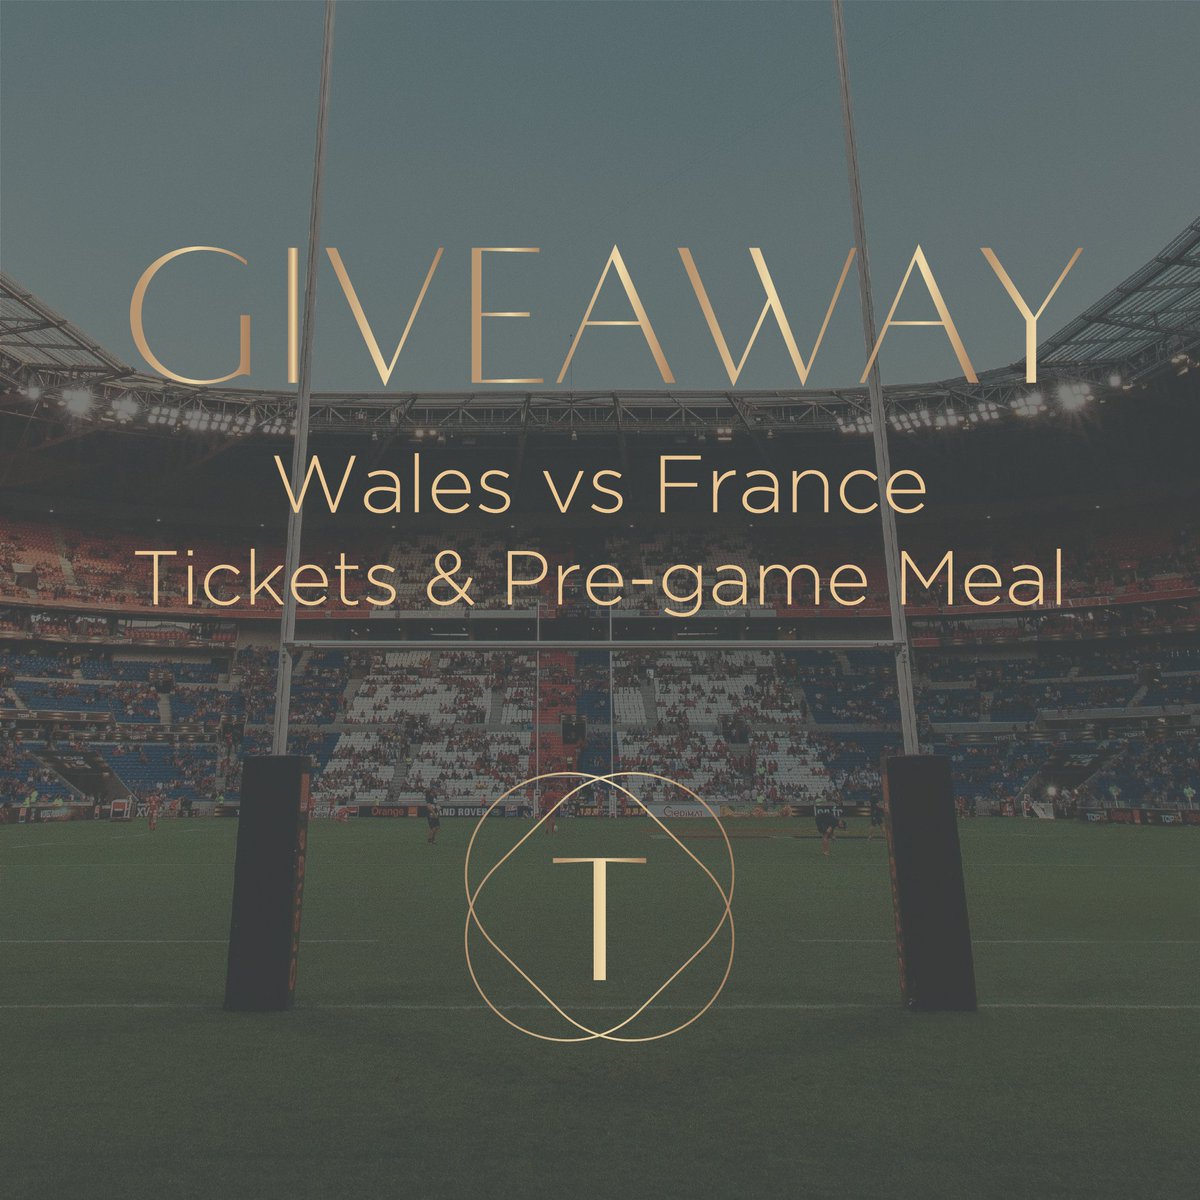 We’re kicking off the 6 Nations with a tasty giveaway!🏉🏴󠁧󠁢󠁷󠁬󠁳󠁿🇫🇷 Follow the rules below for the chance to win 2 #6Nations tickets AND a pre-game meal for 2 at our new restaurant! To enter: 1. Like & retweet this post 2. Tag your plus-one 3. Make sure you both follow @thomaspontcanna